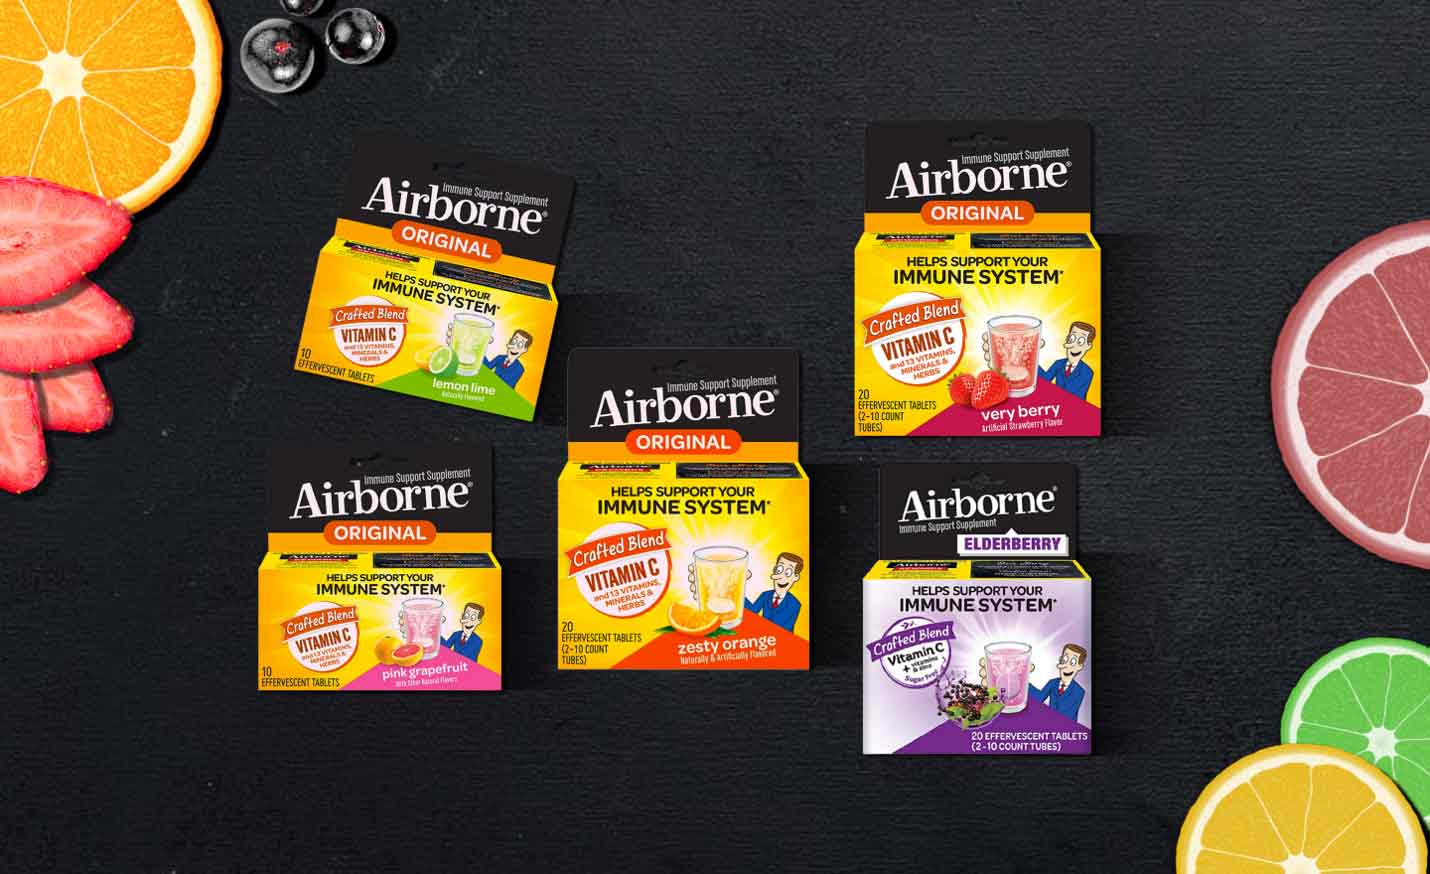 Airborne Effervescent tablets come in a range of fruit flavors 